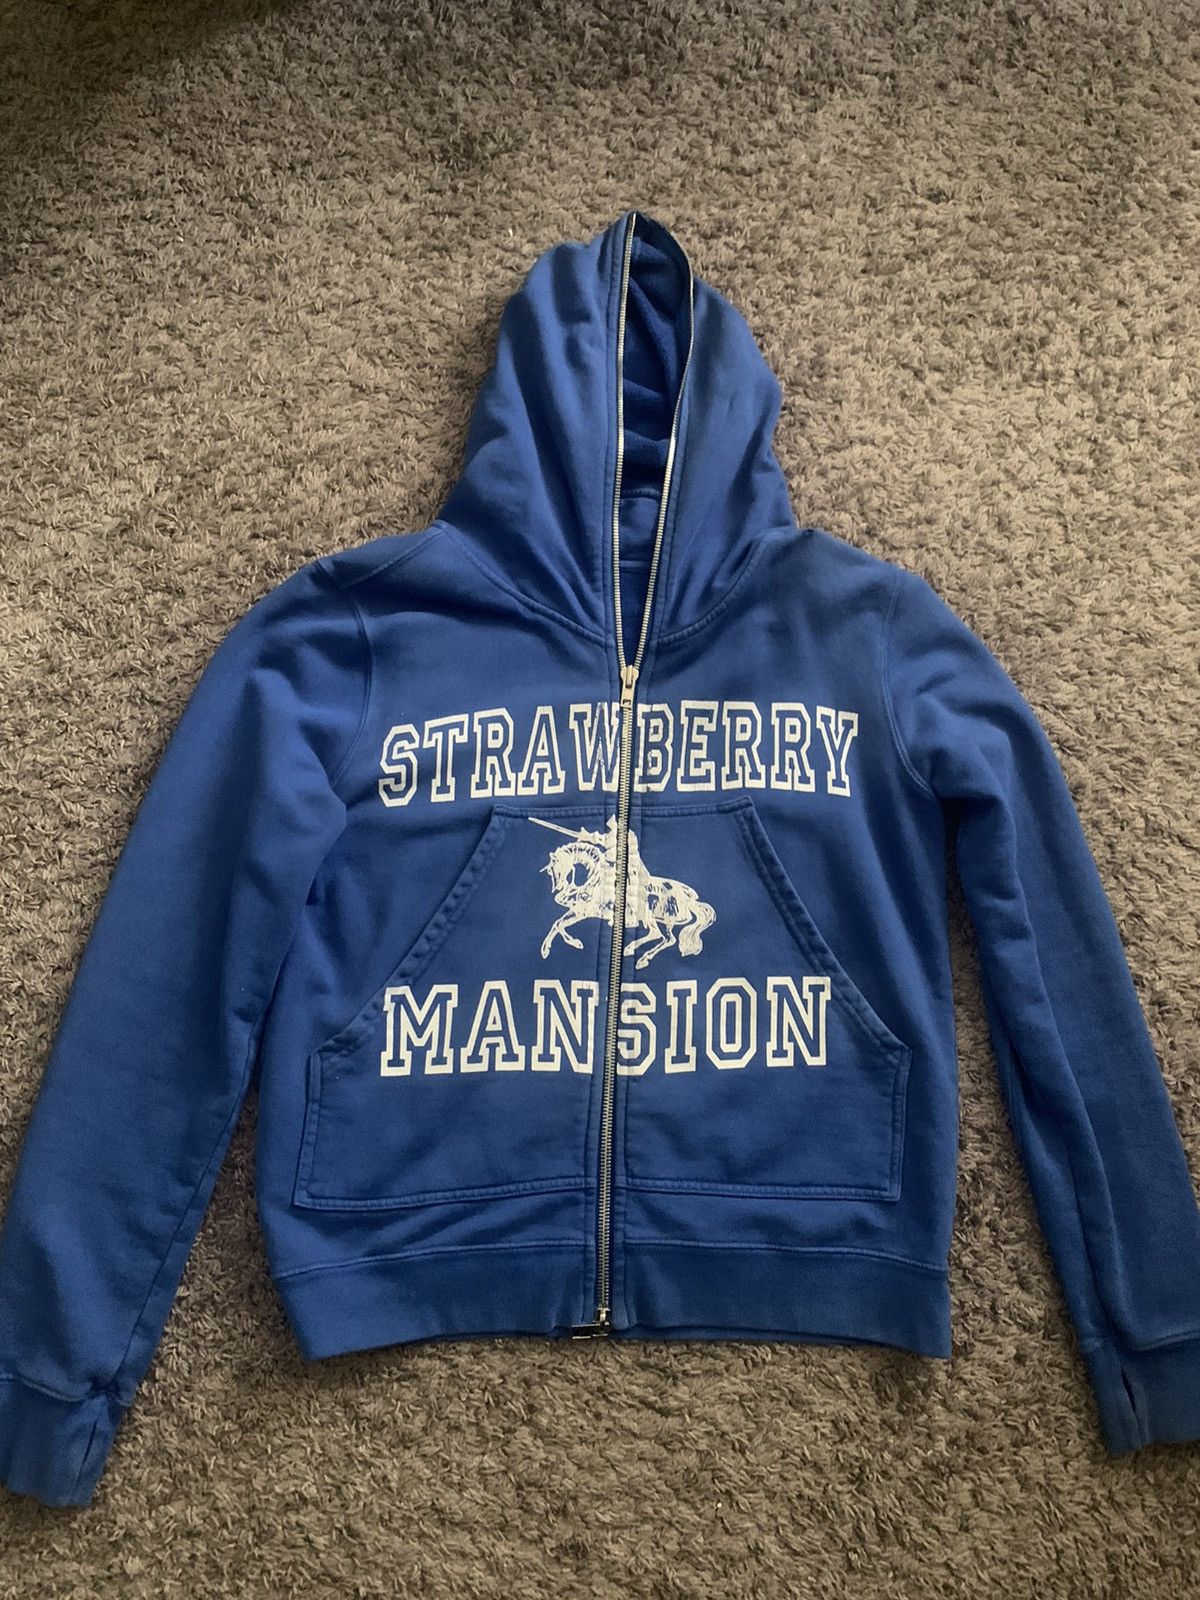 Unwanted Strawberry Mansion Hoodie | Grailed